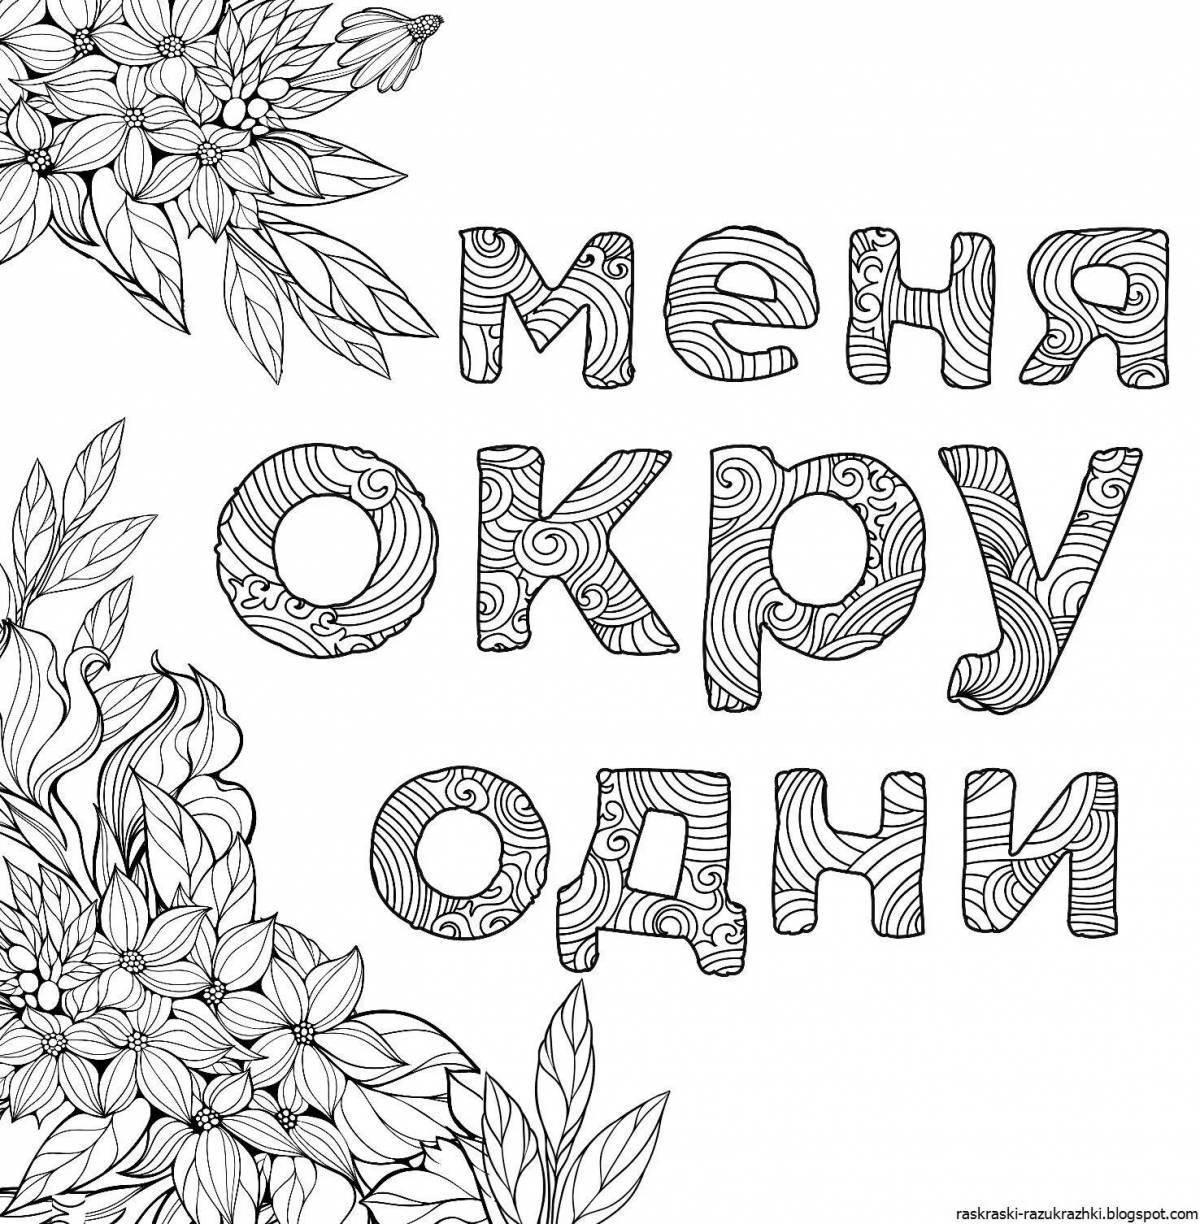 Color-frenzy coloring page для дебилов